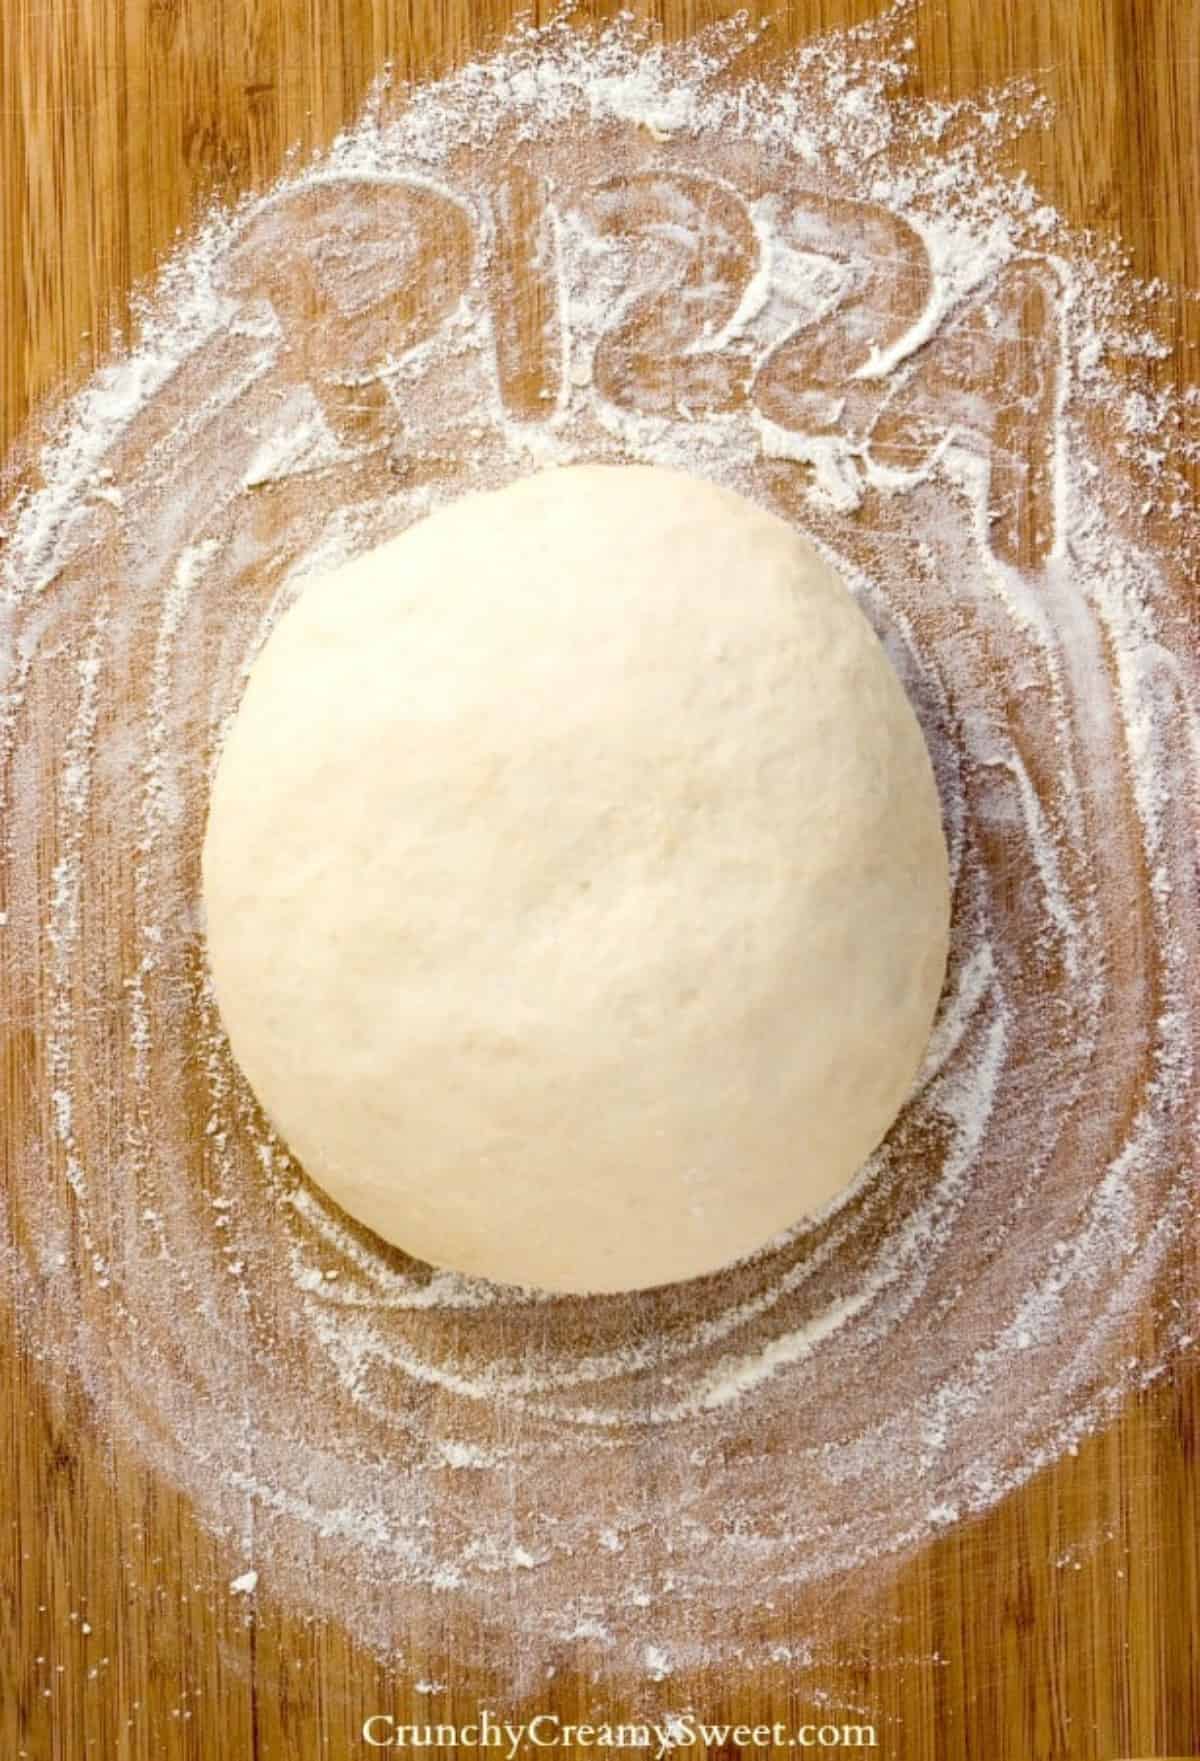 Pizza dough on a wooden board.